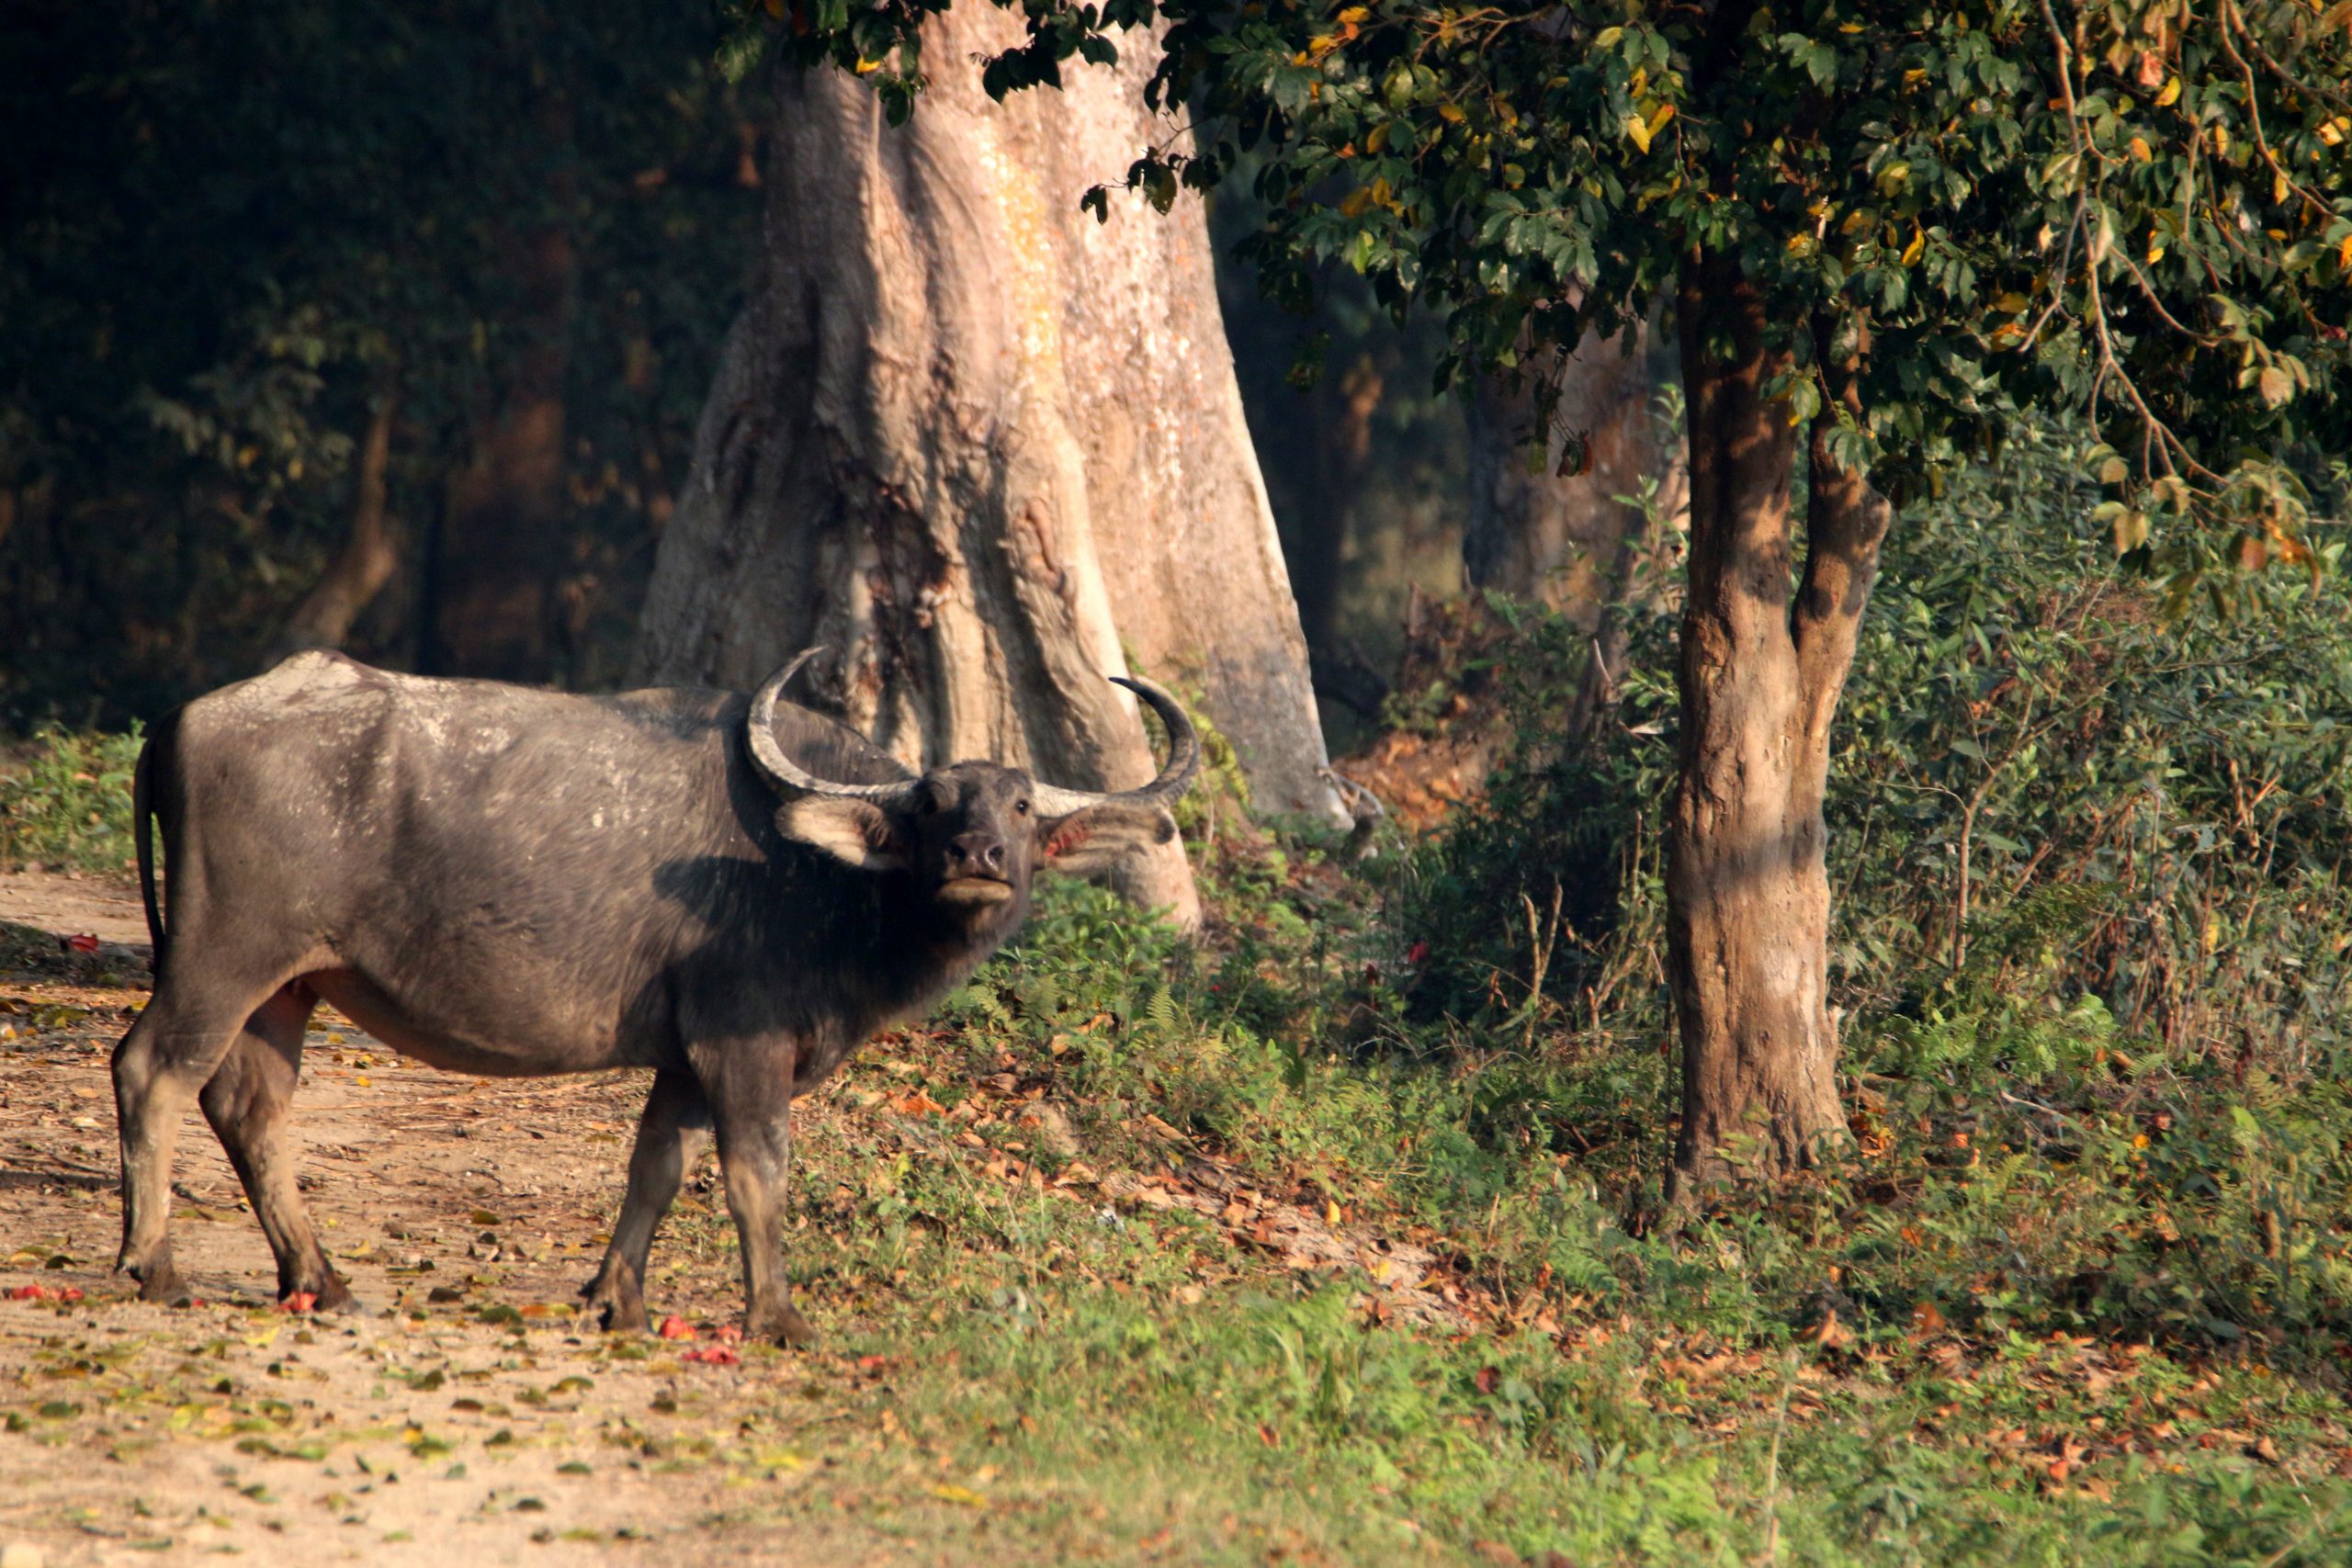 Wild Buffalo in the forest